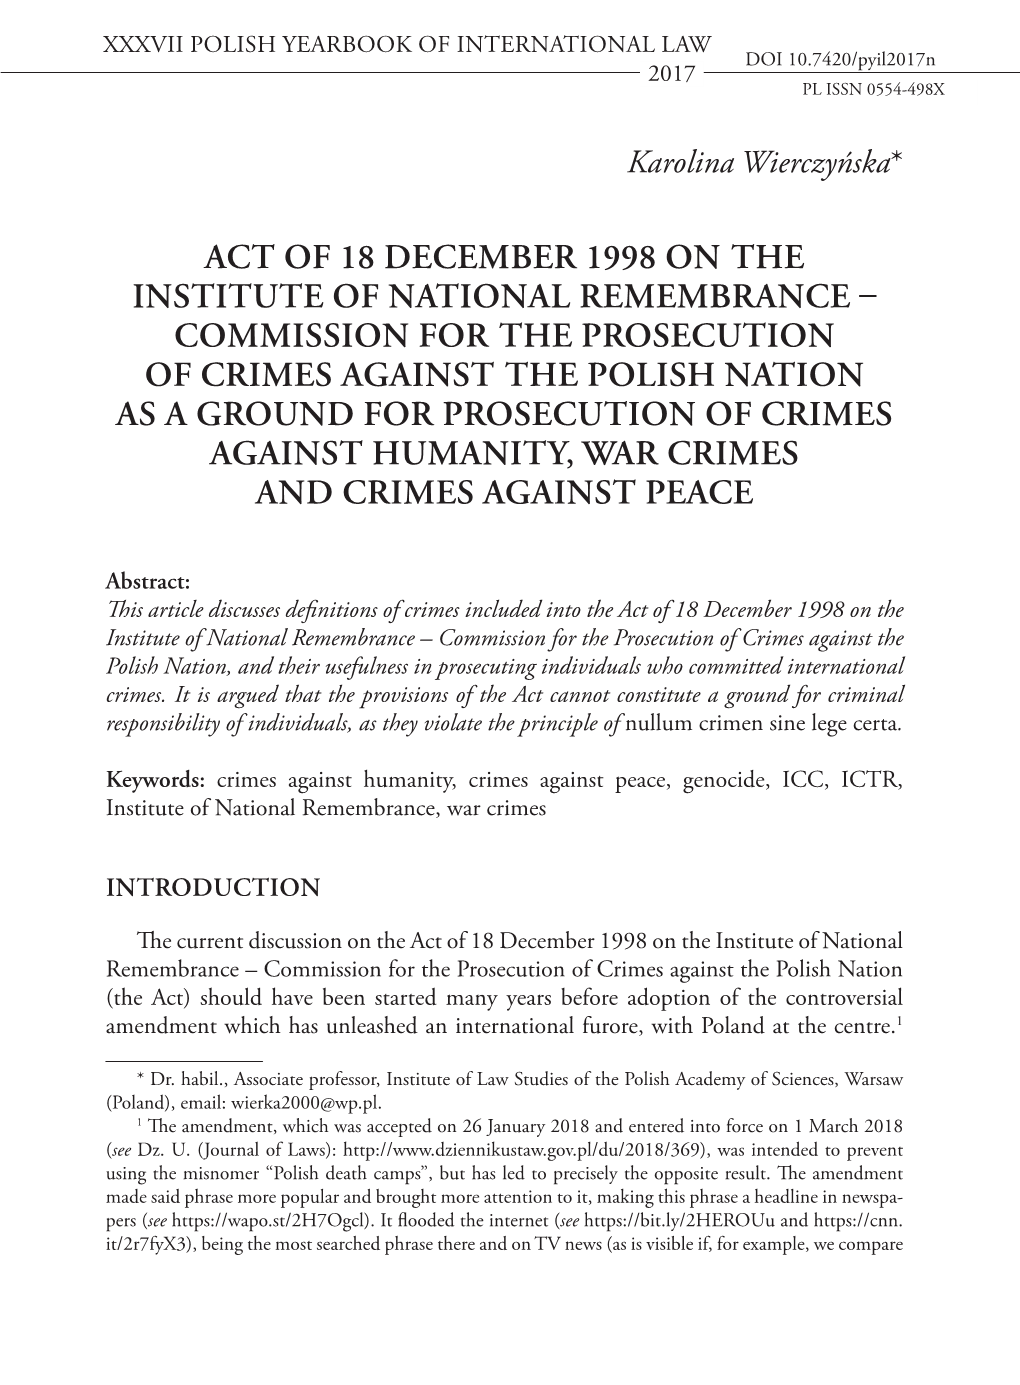 Commission for the Prosecution of Crimes Against the Polish Nation As a Ground for Prosecution of Crimes Against Humanity, War Crimes and Crimes Against Peace